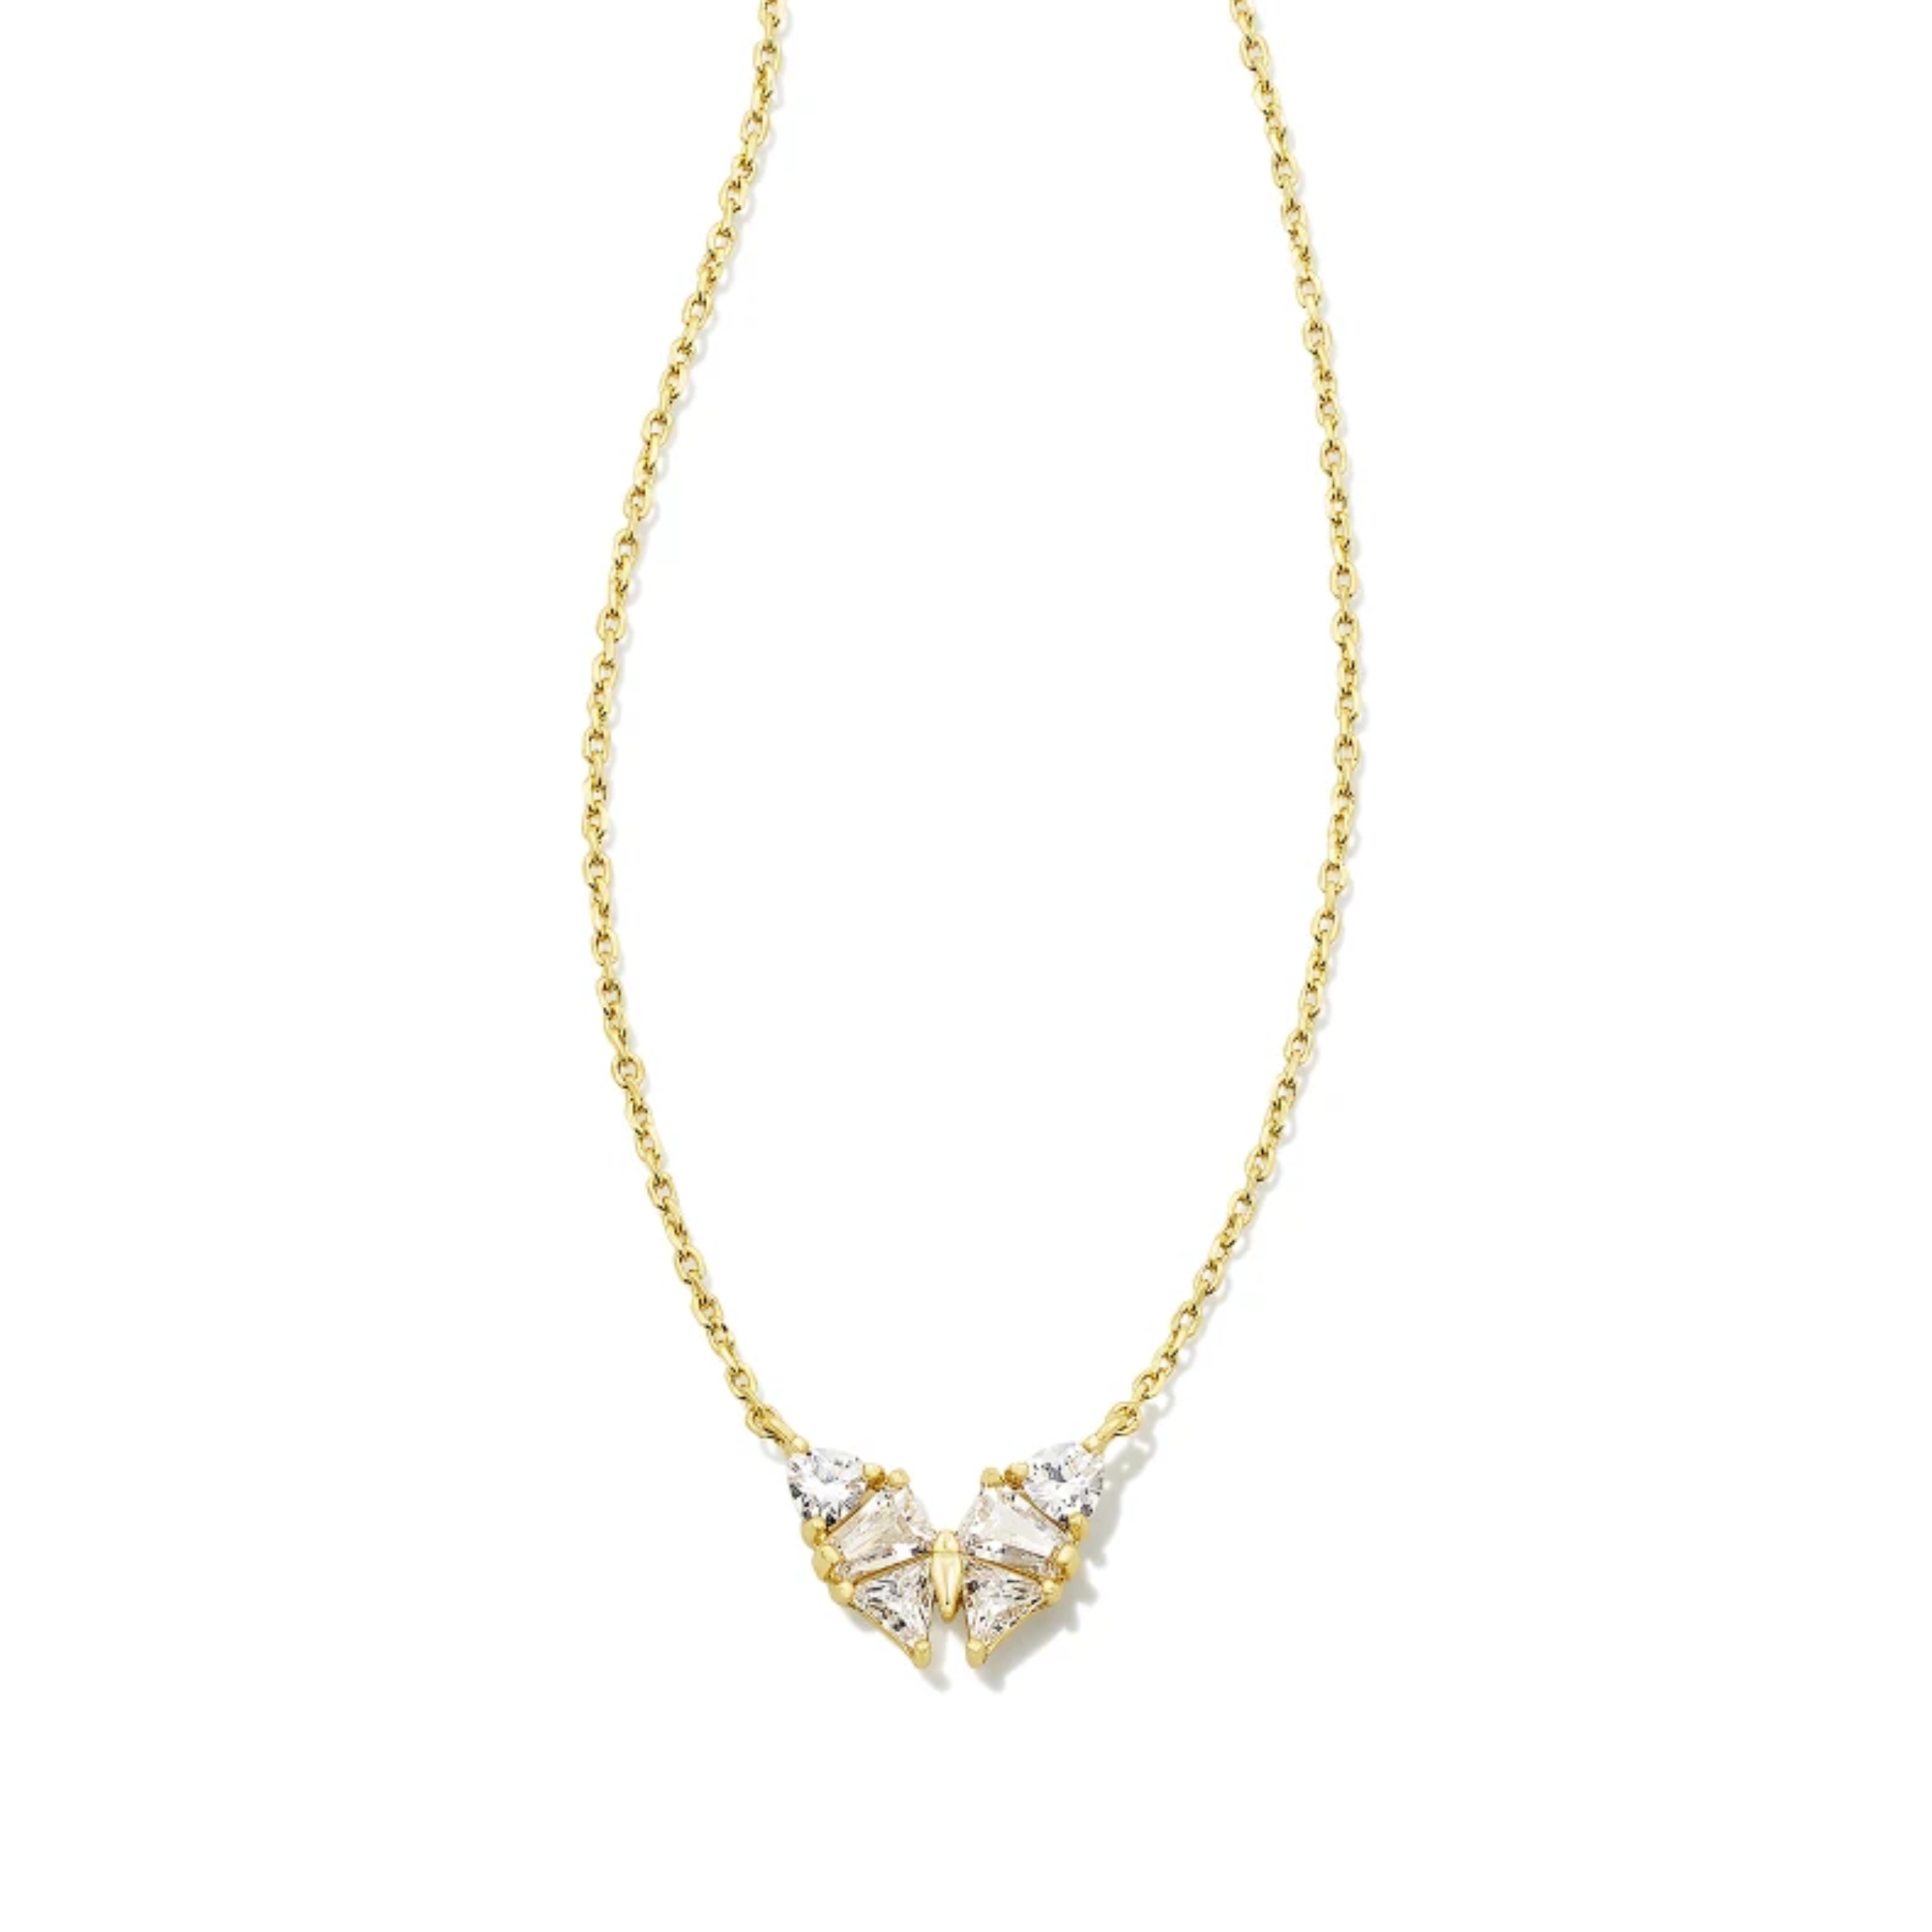 This Blair Gold Butterfly Short Pendant Necklace in White Crystal by Kendra Scott is pictured on a white background.